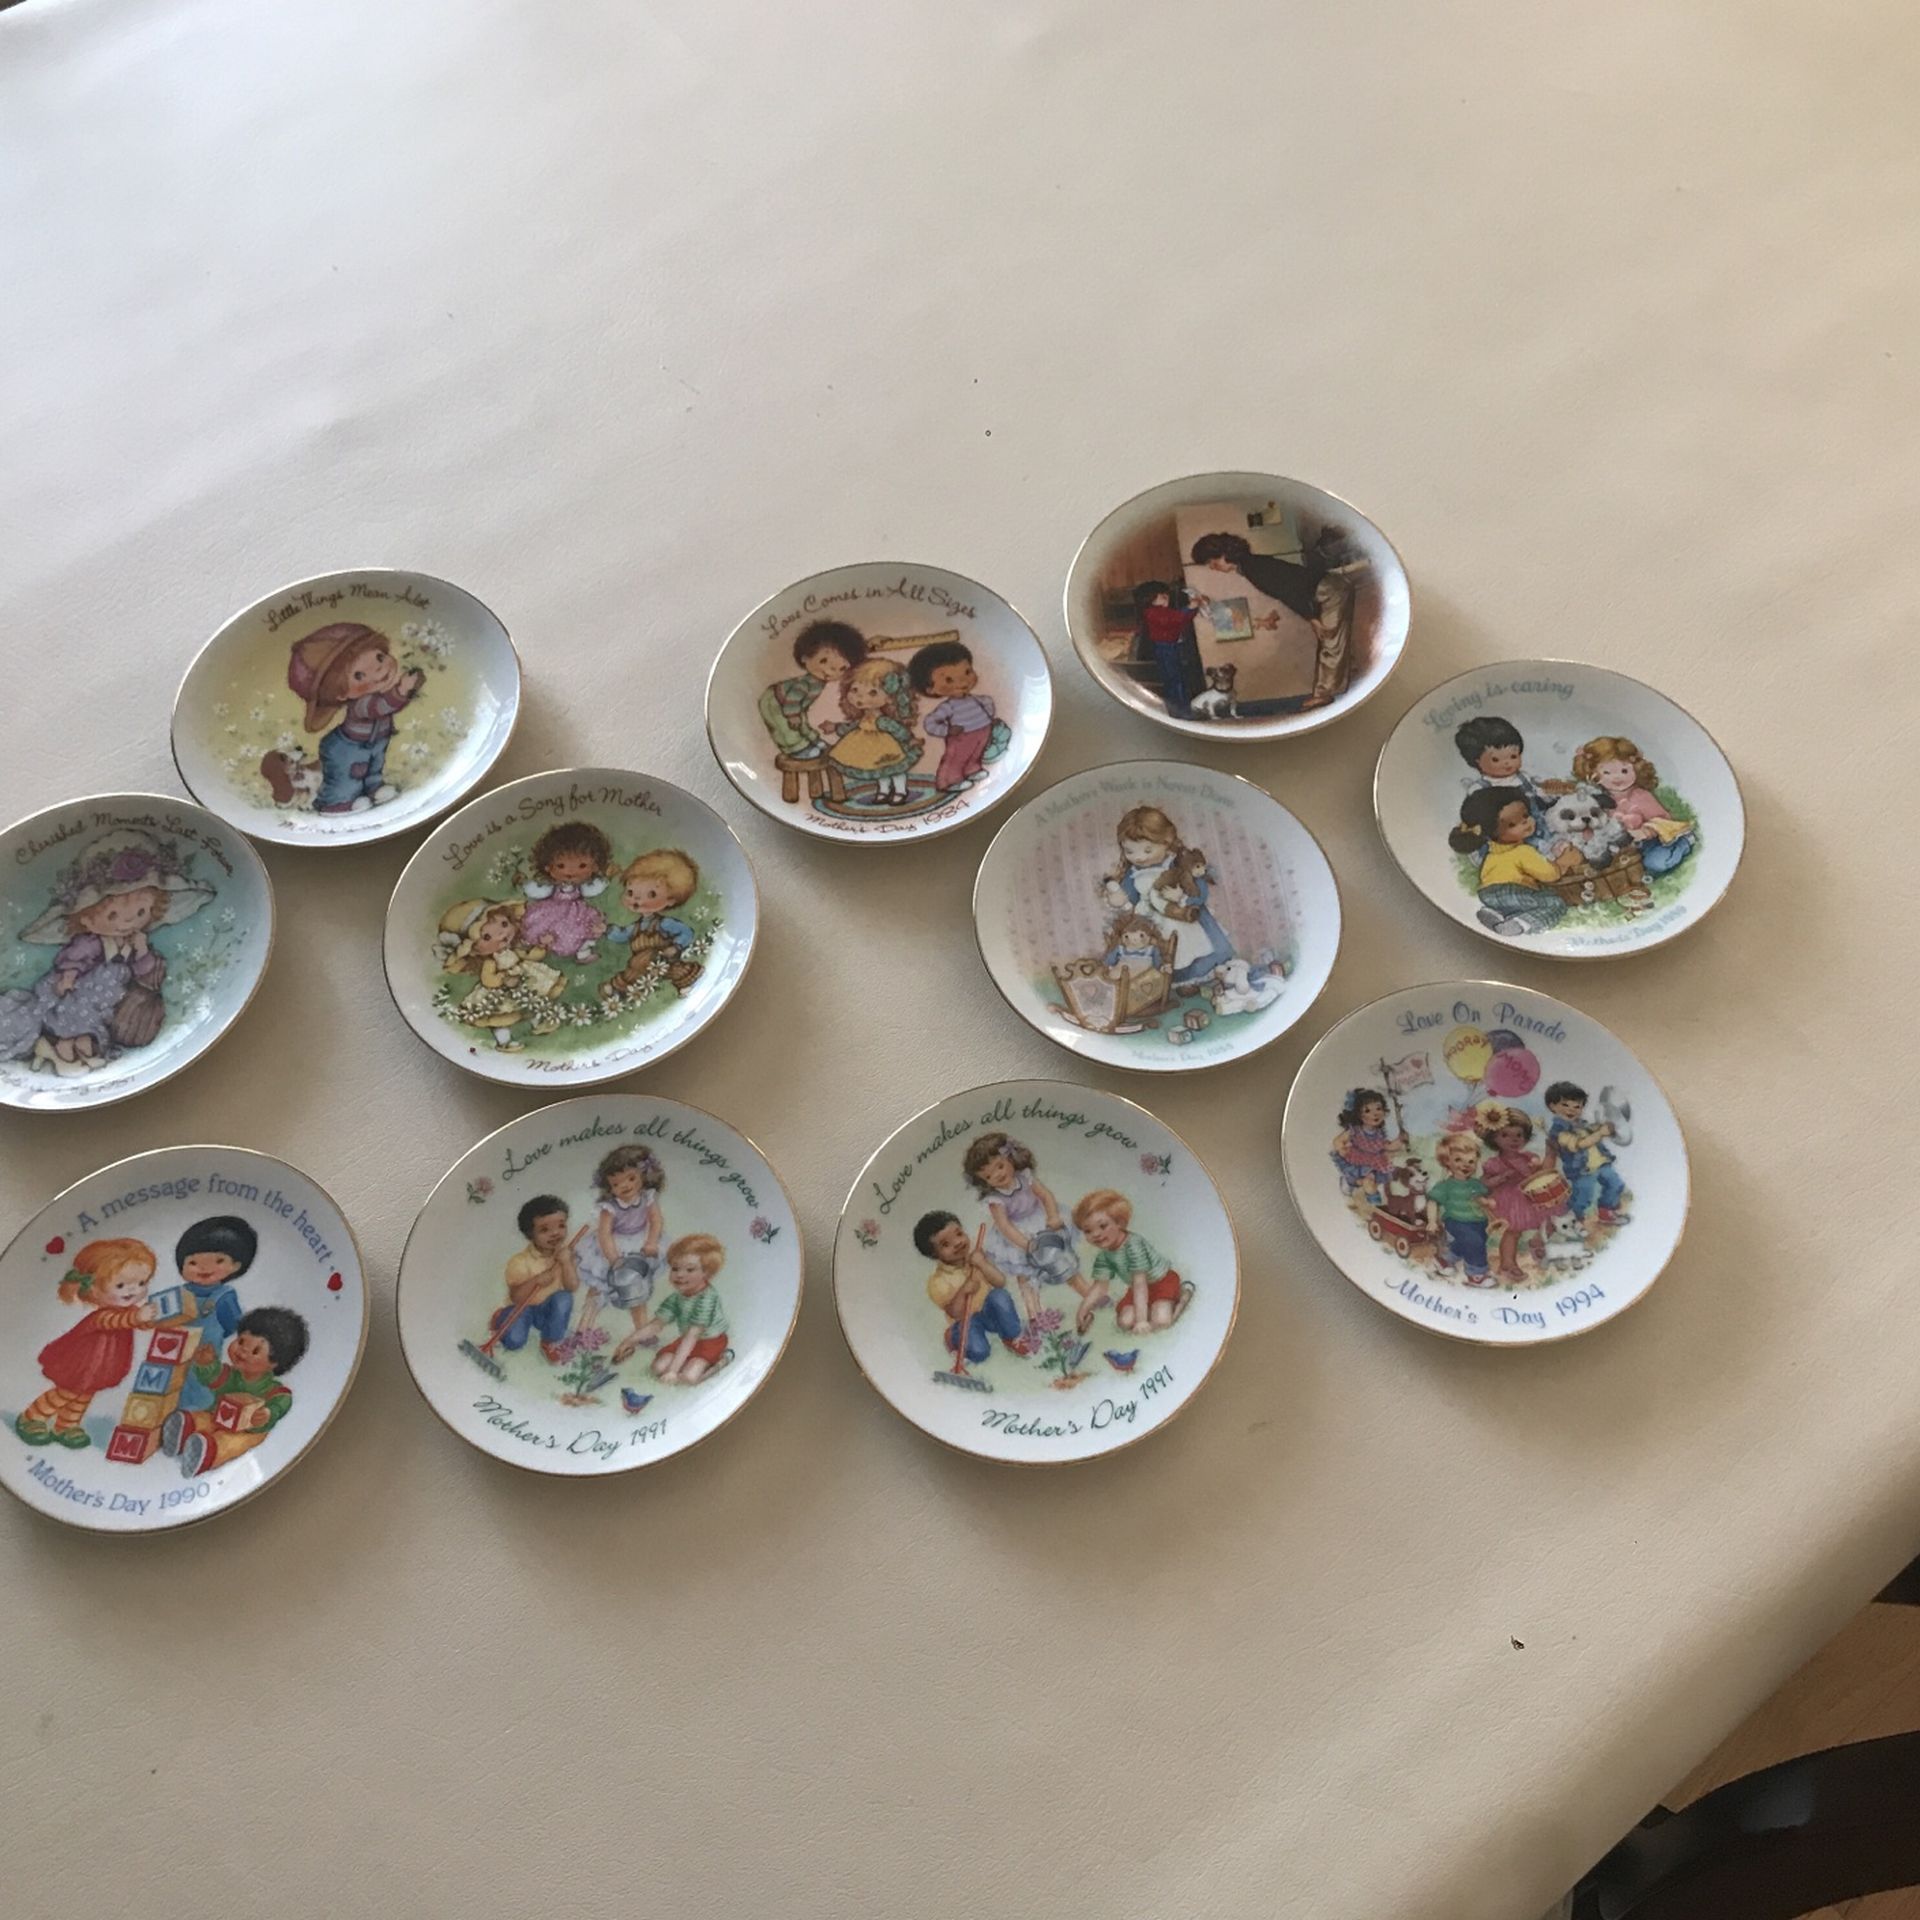 5 Inch Precious Moments Mother’s Day Plates